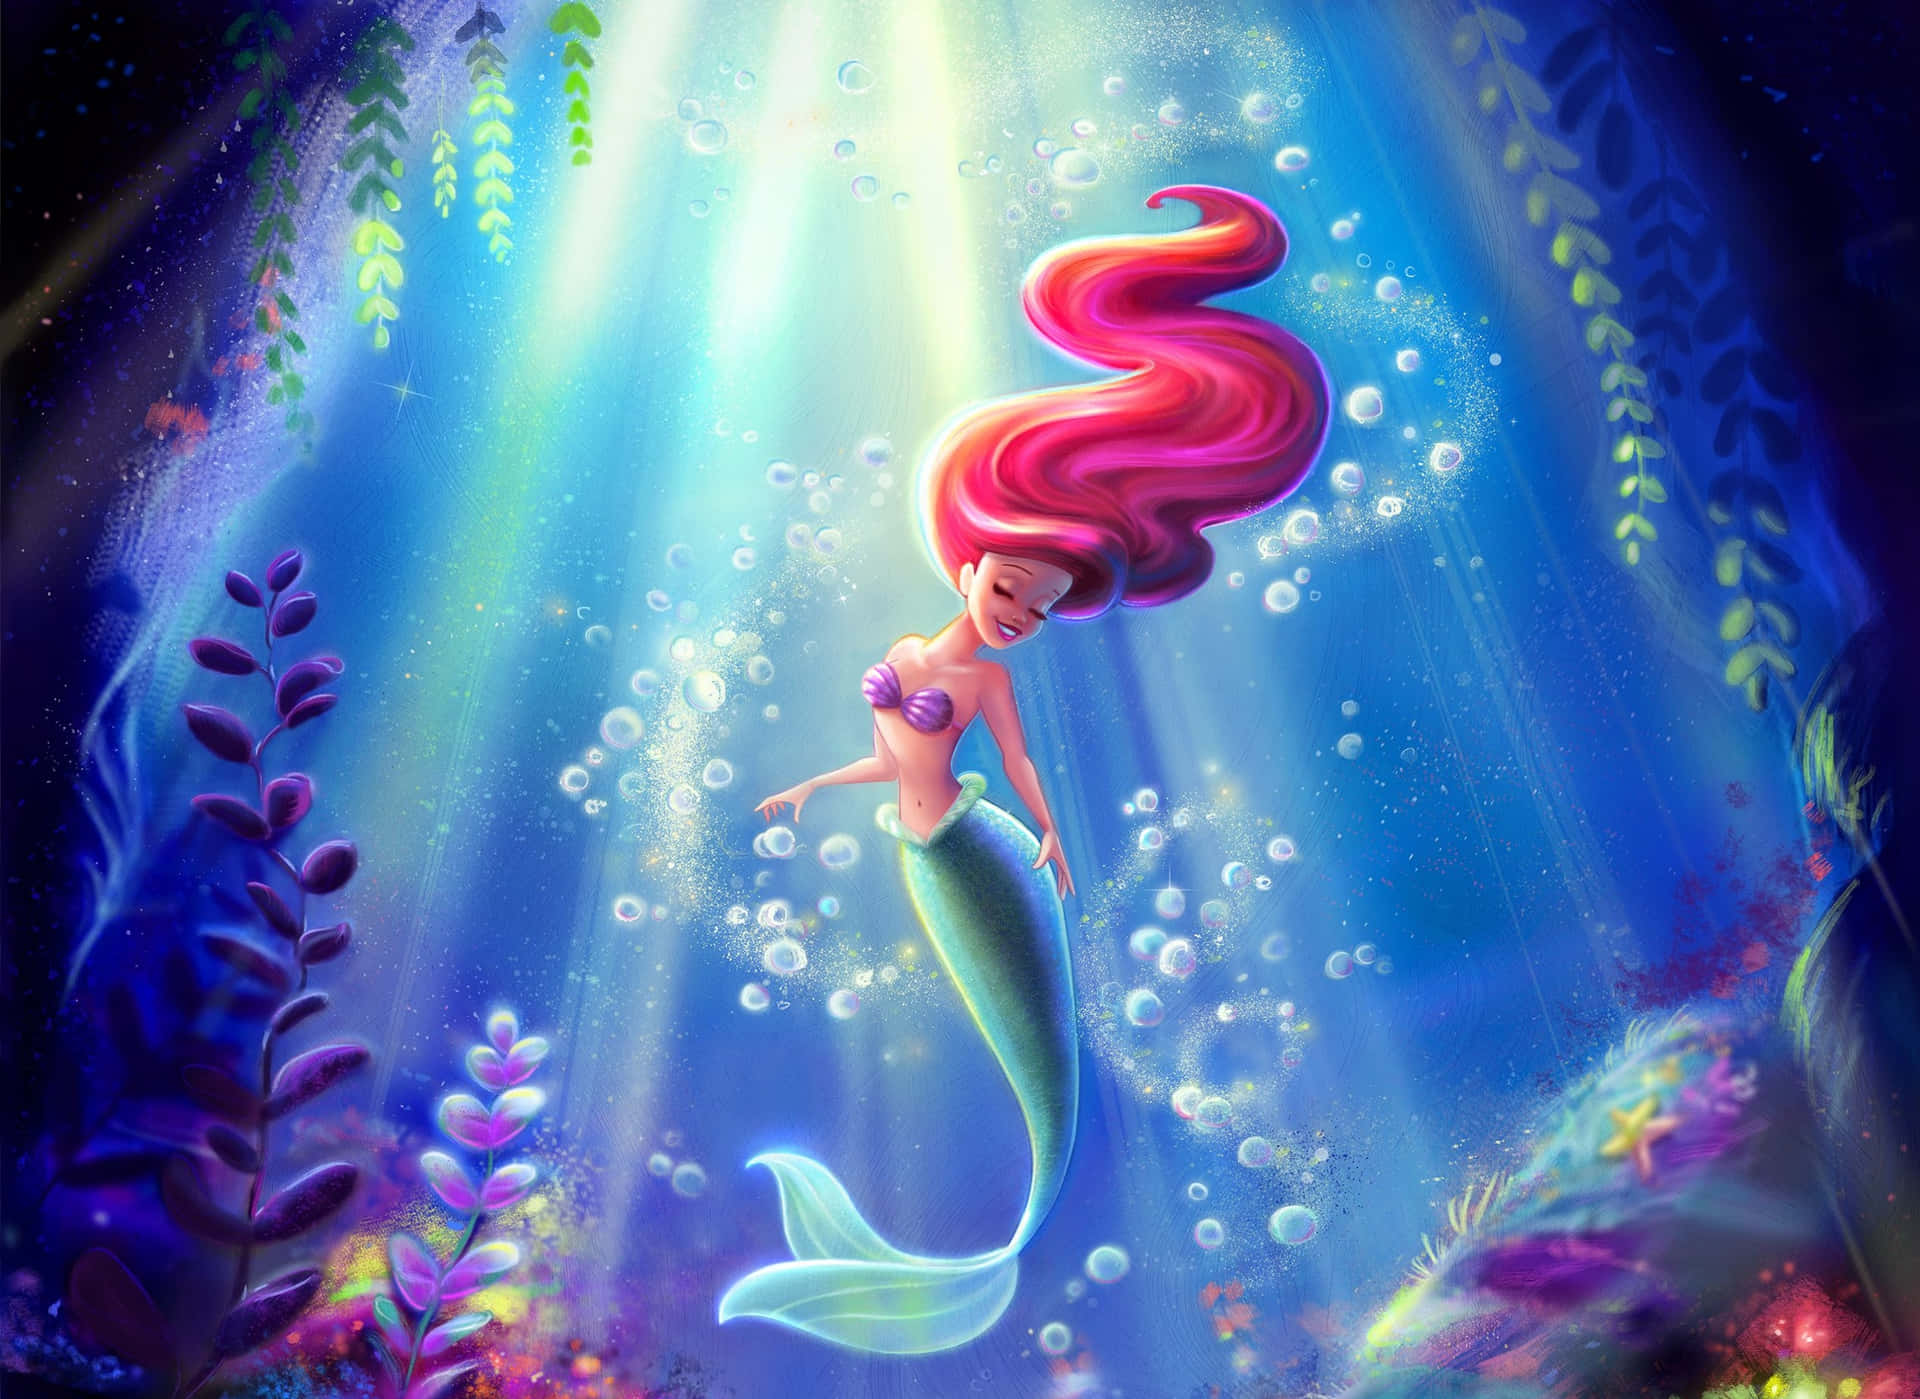 "This beautiful mermaid looks out over the open sea." Wallpaper